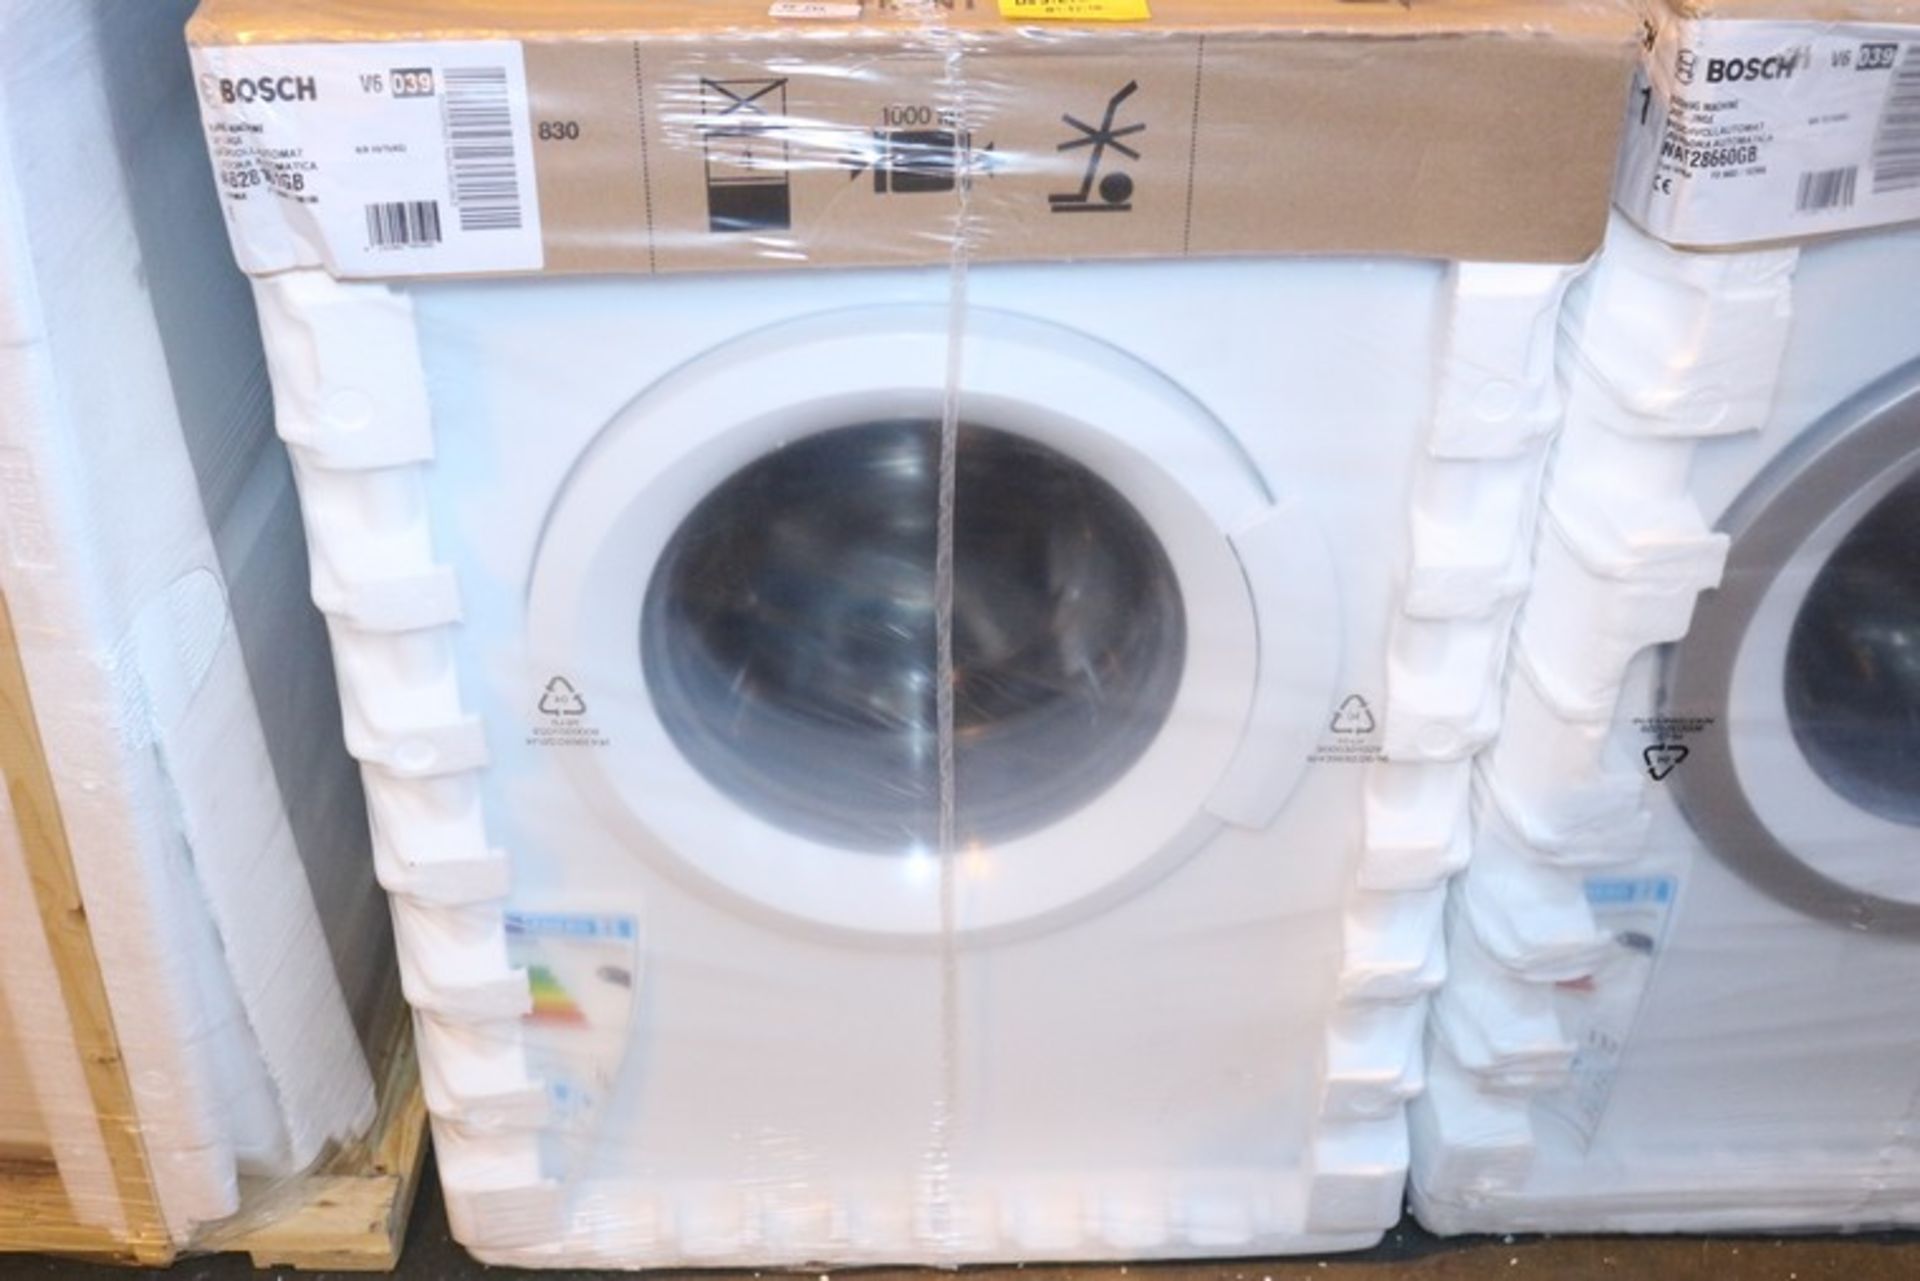 1 x BOXED BOSCH WAB28161GB UNDER THE COUNTER WASHING MACHINE IN WHITE (88931202) RRP £300 *PLEASE